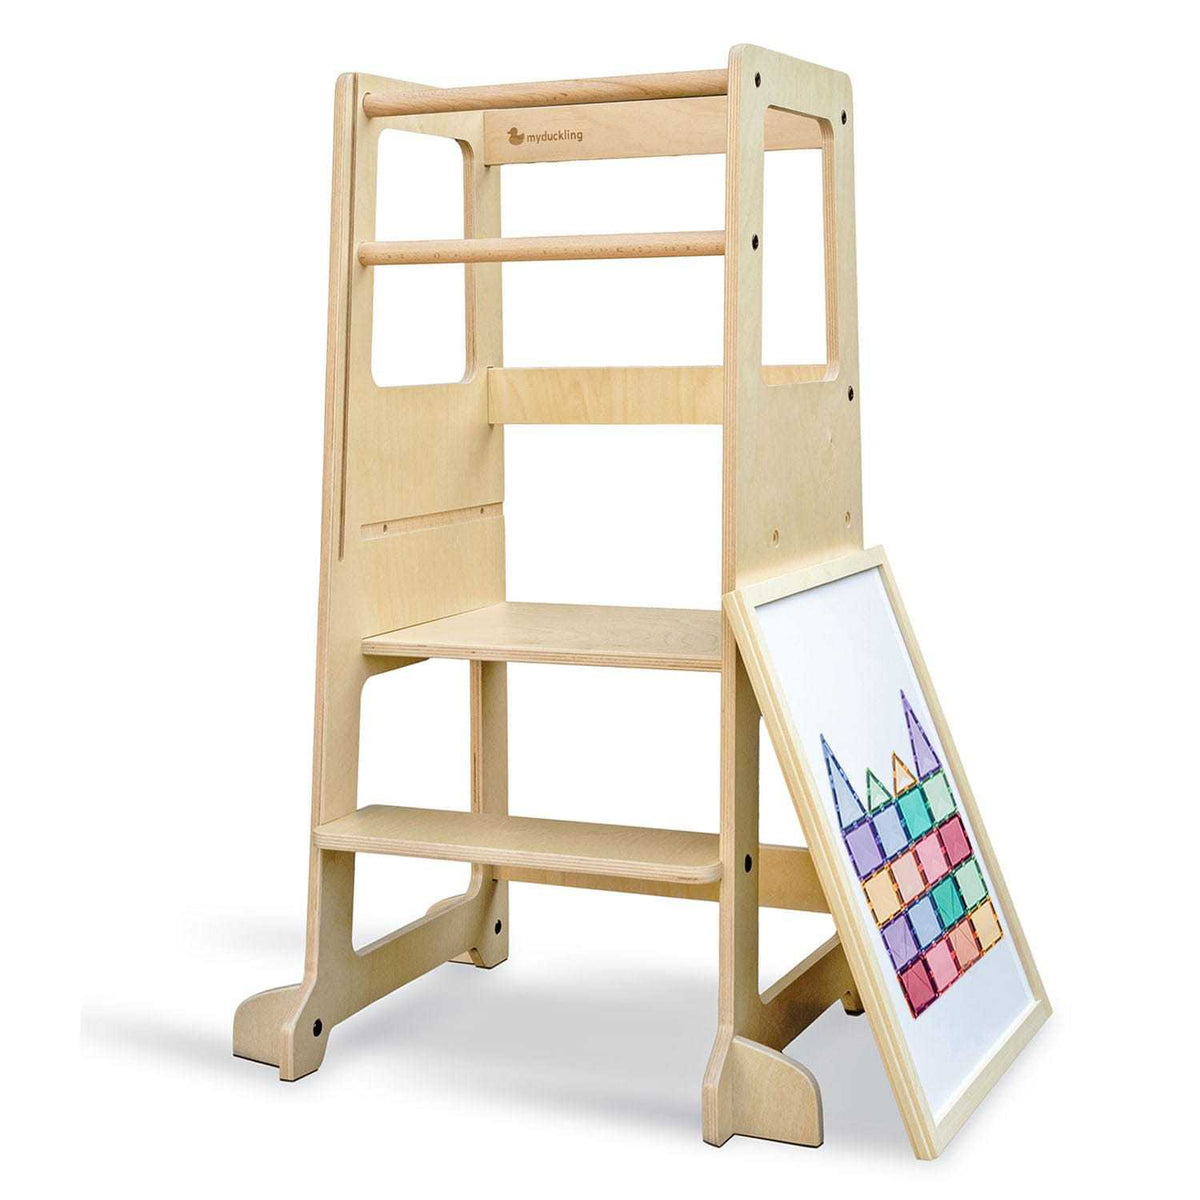 My Duckling LOLA Deluxe Adjustable Learning Tower - Natural